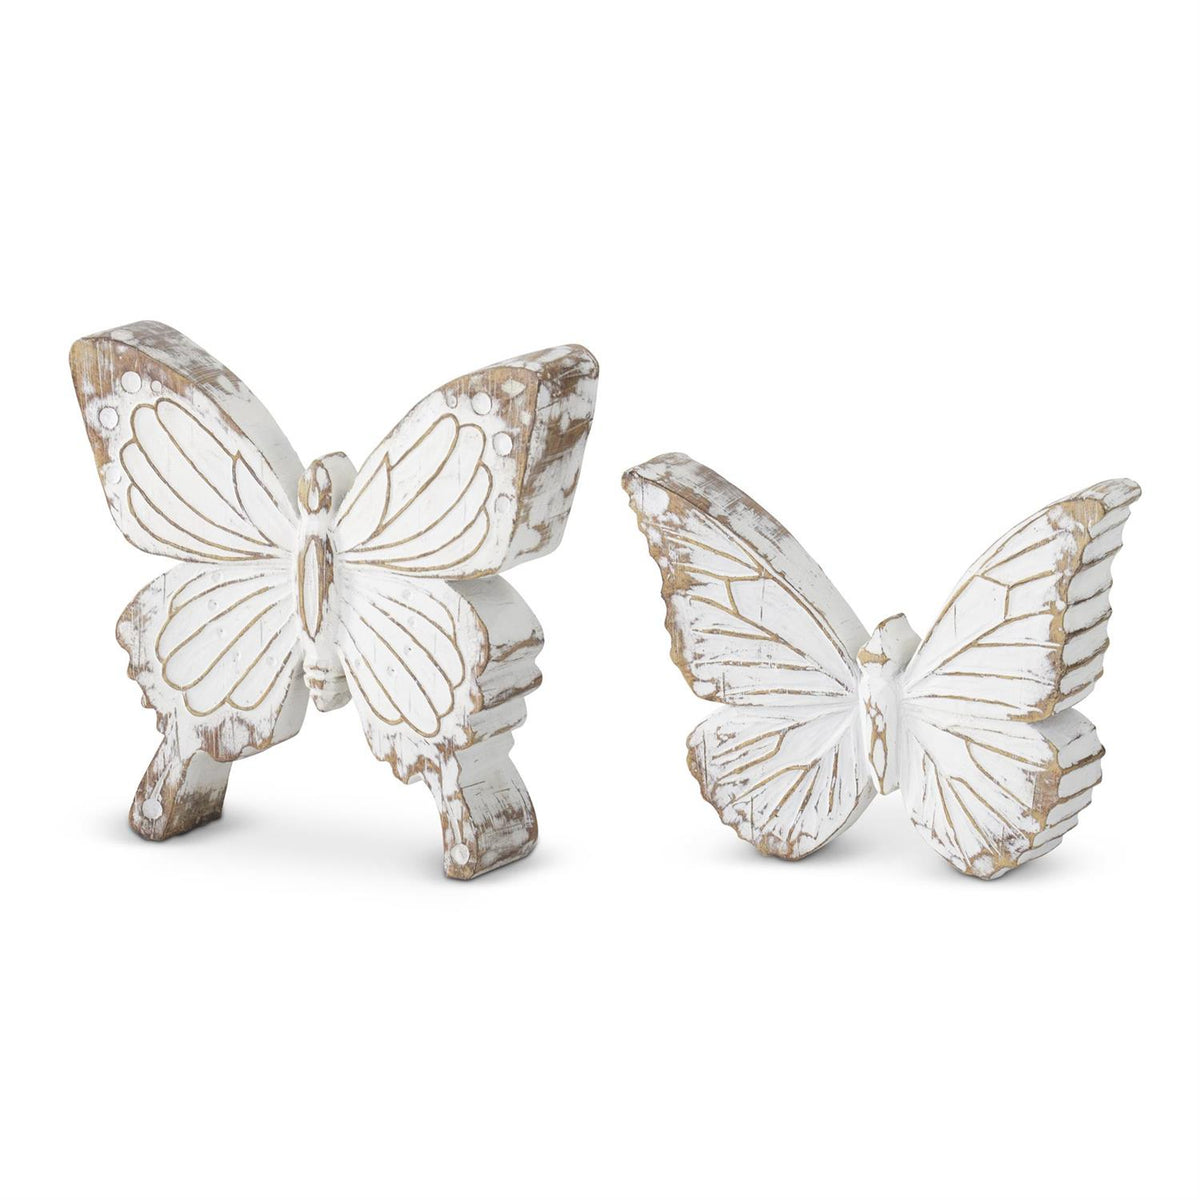 Whitewashed Carved Resin Butterfly